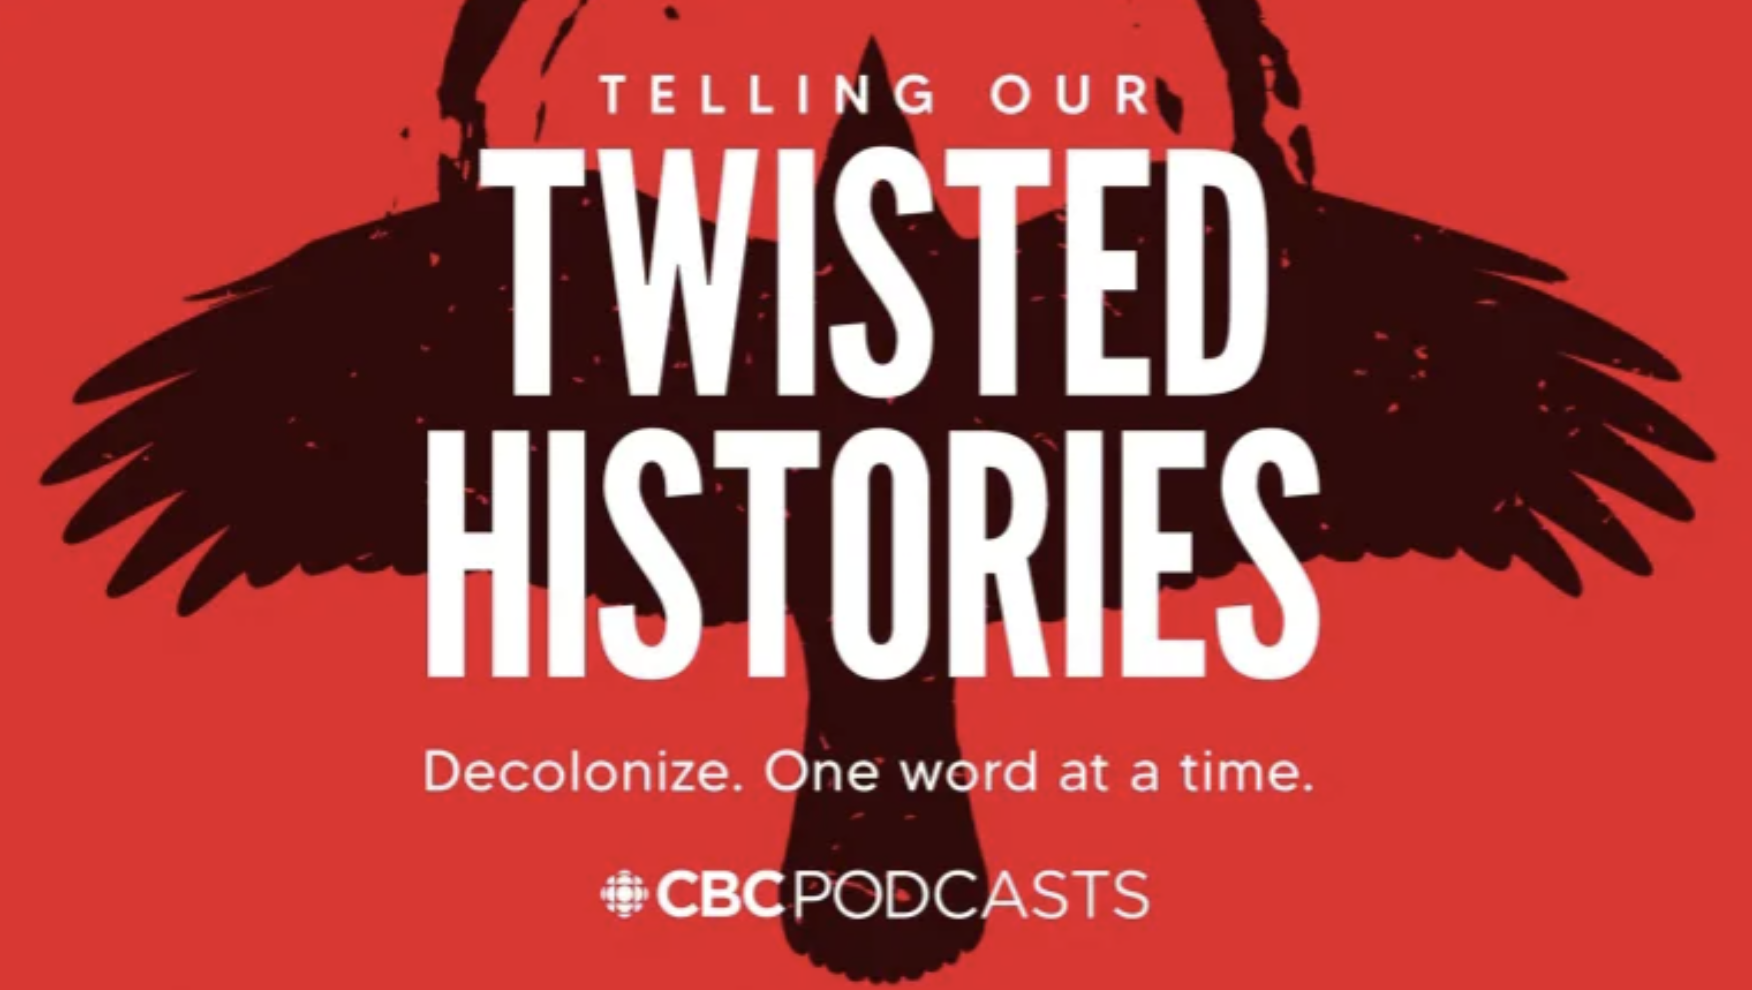 Telling Twisted Histories